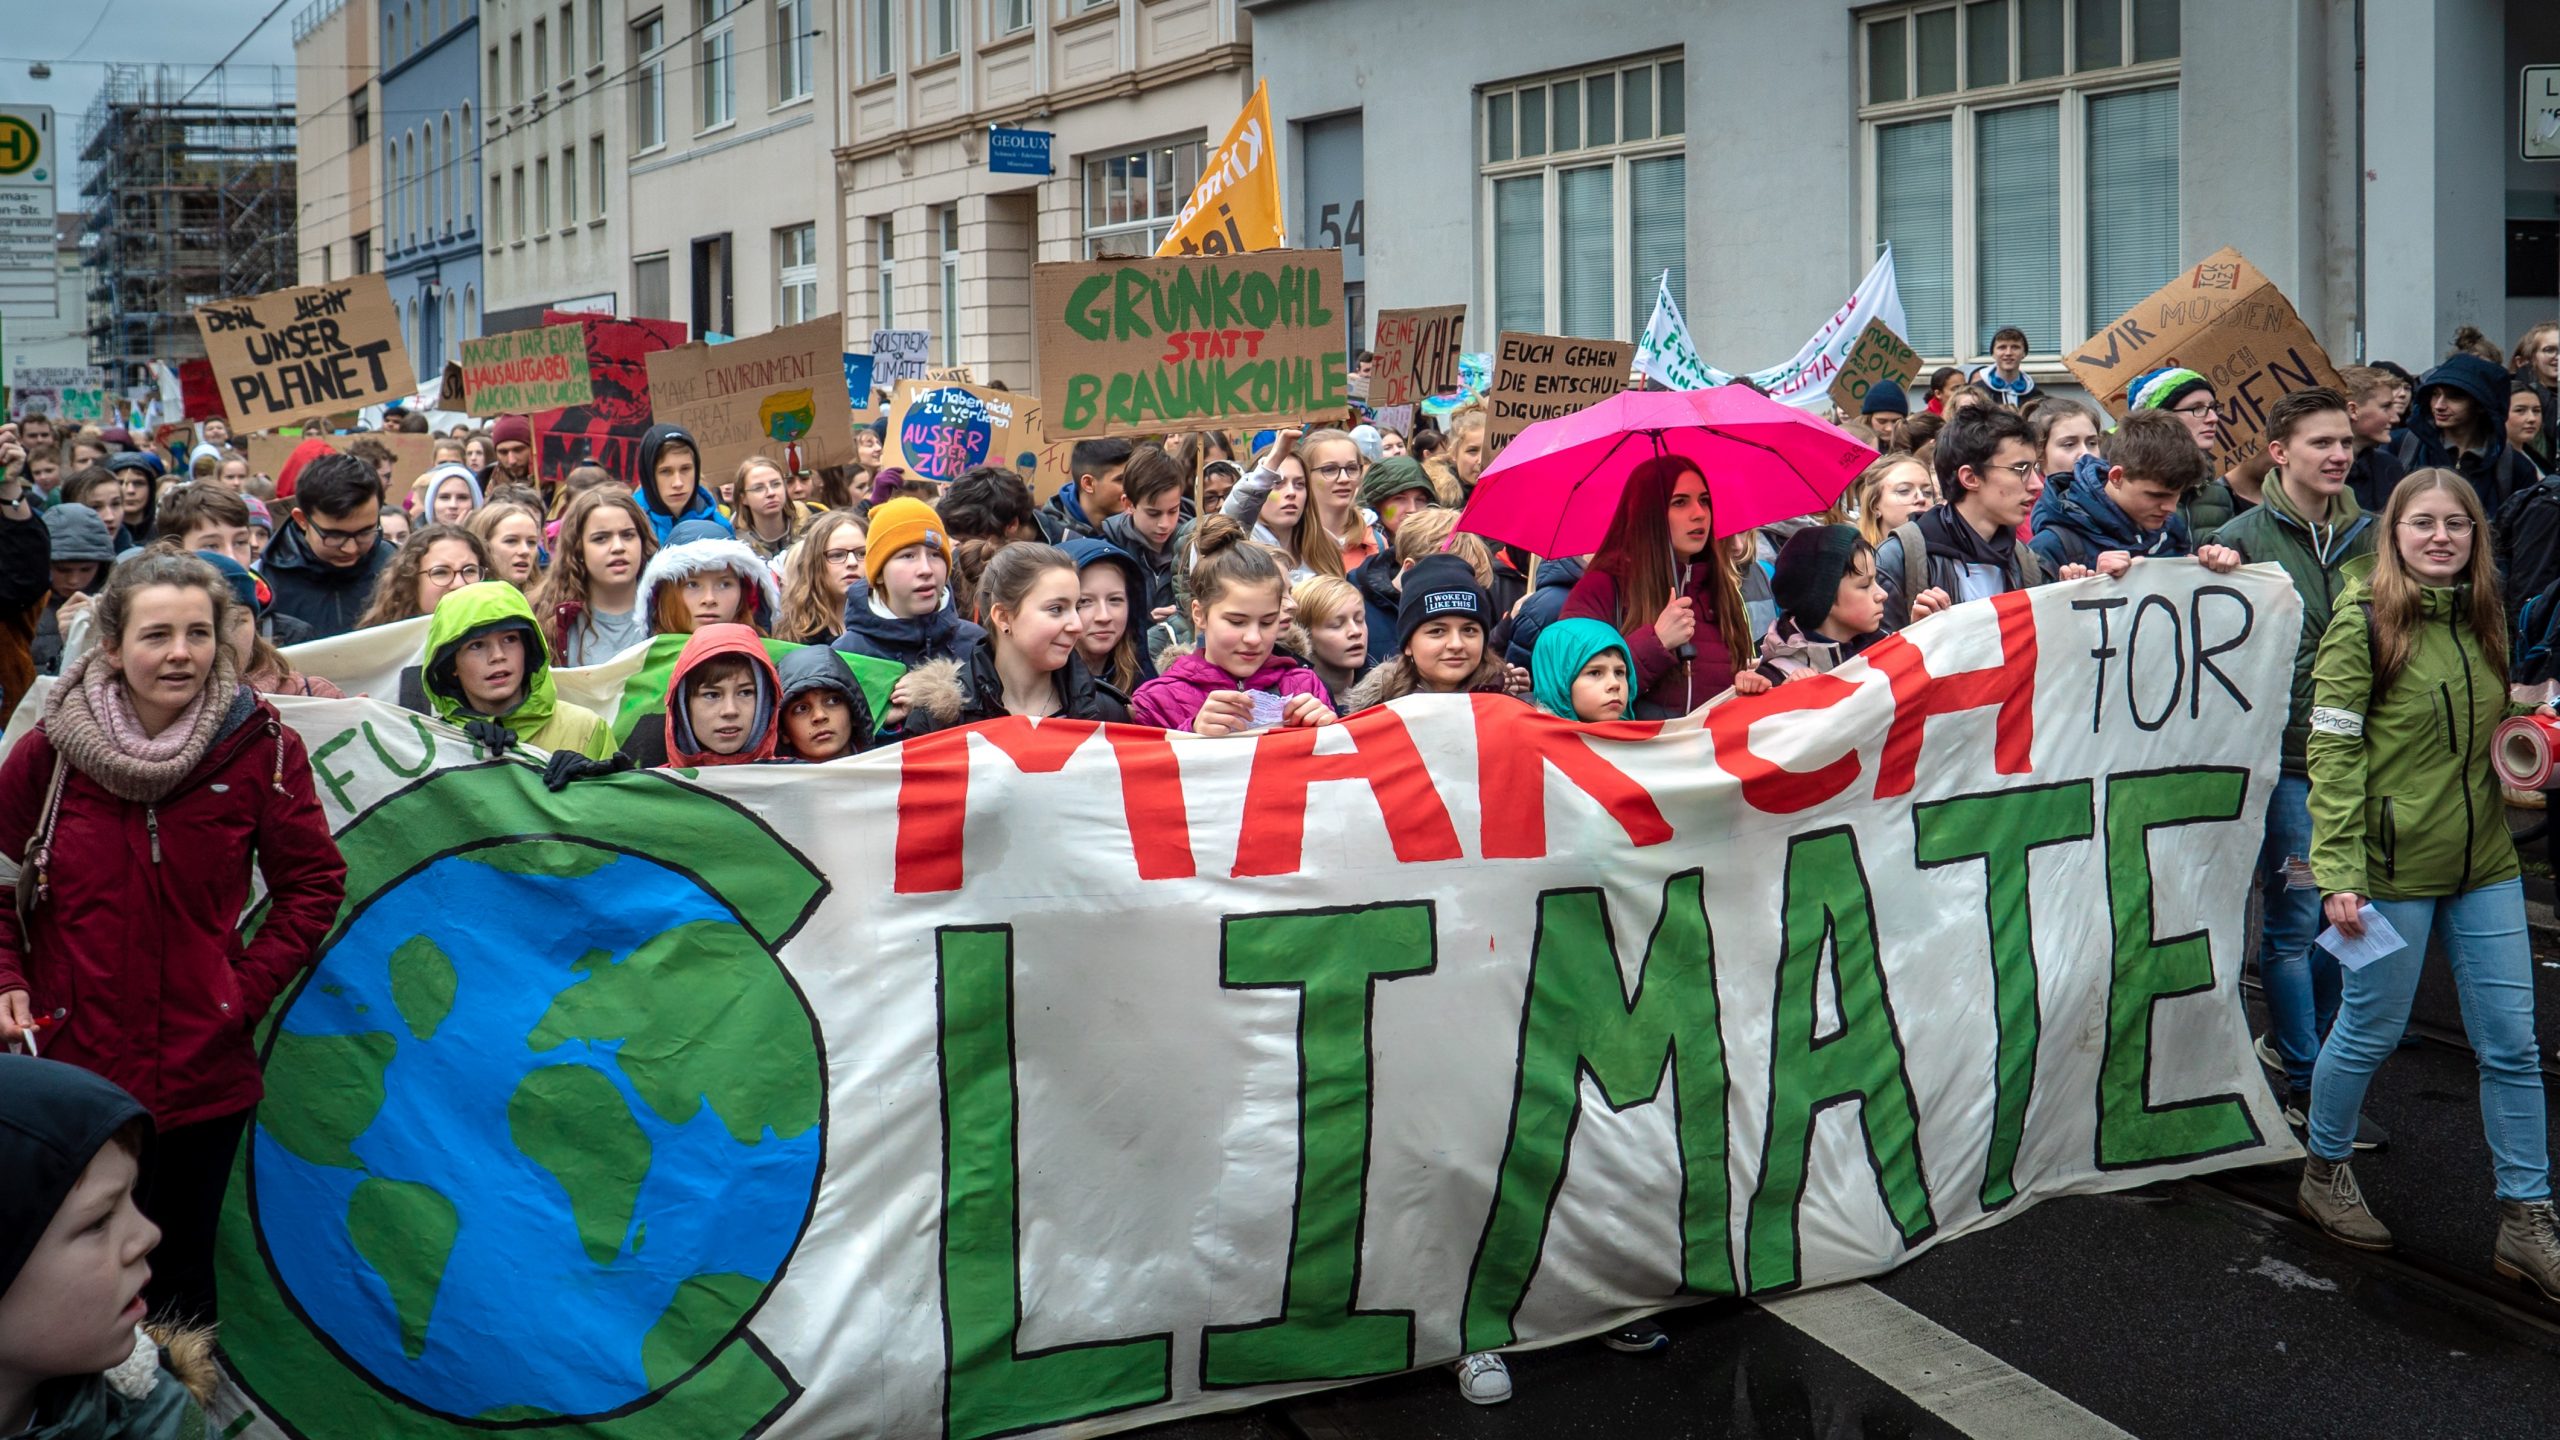 Fridays for Future, 15.03.19, Bonn Photo by Mika Baumeister on Unsplash